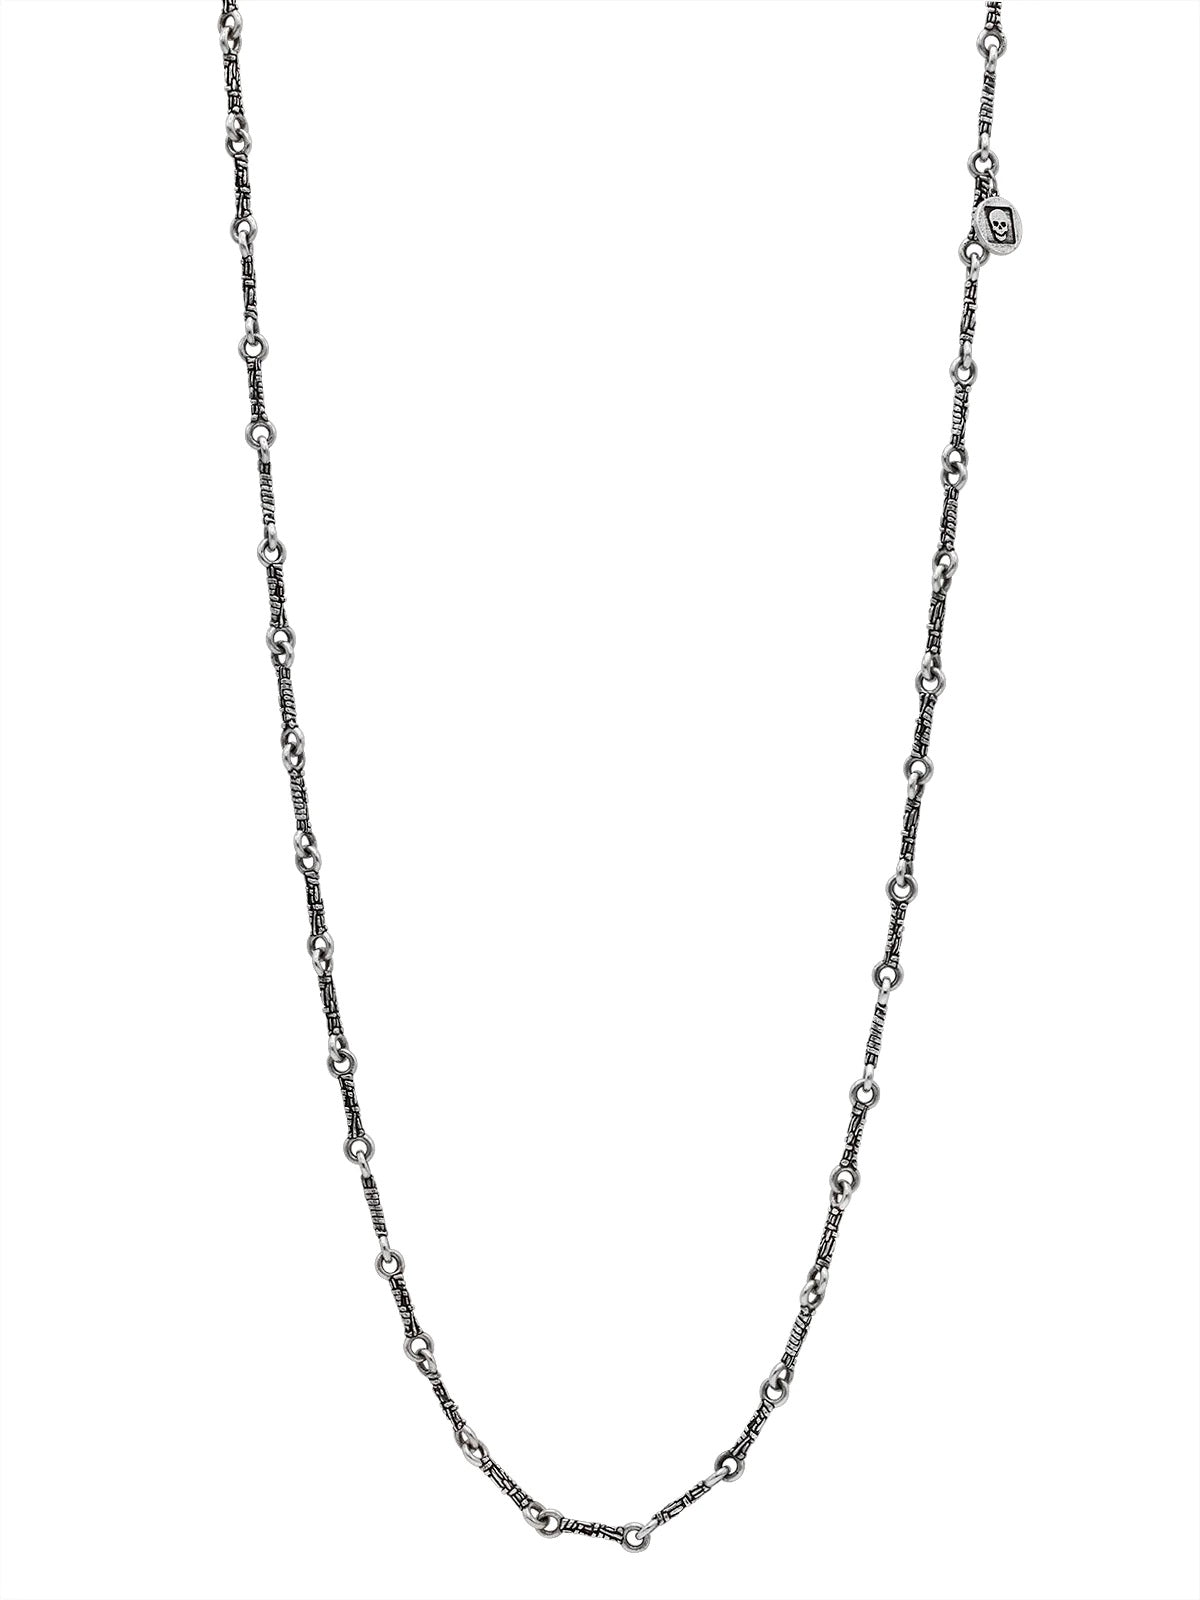 ARTISAN STERLING SILVER SINGLE STRAND NECKLACE, WOVEN TEXTURE